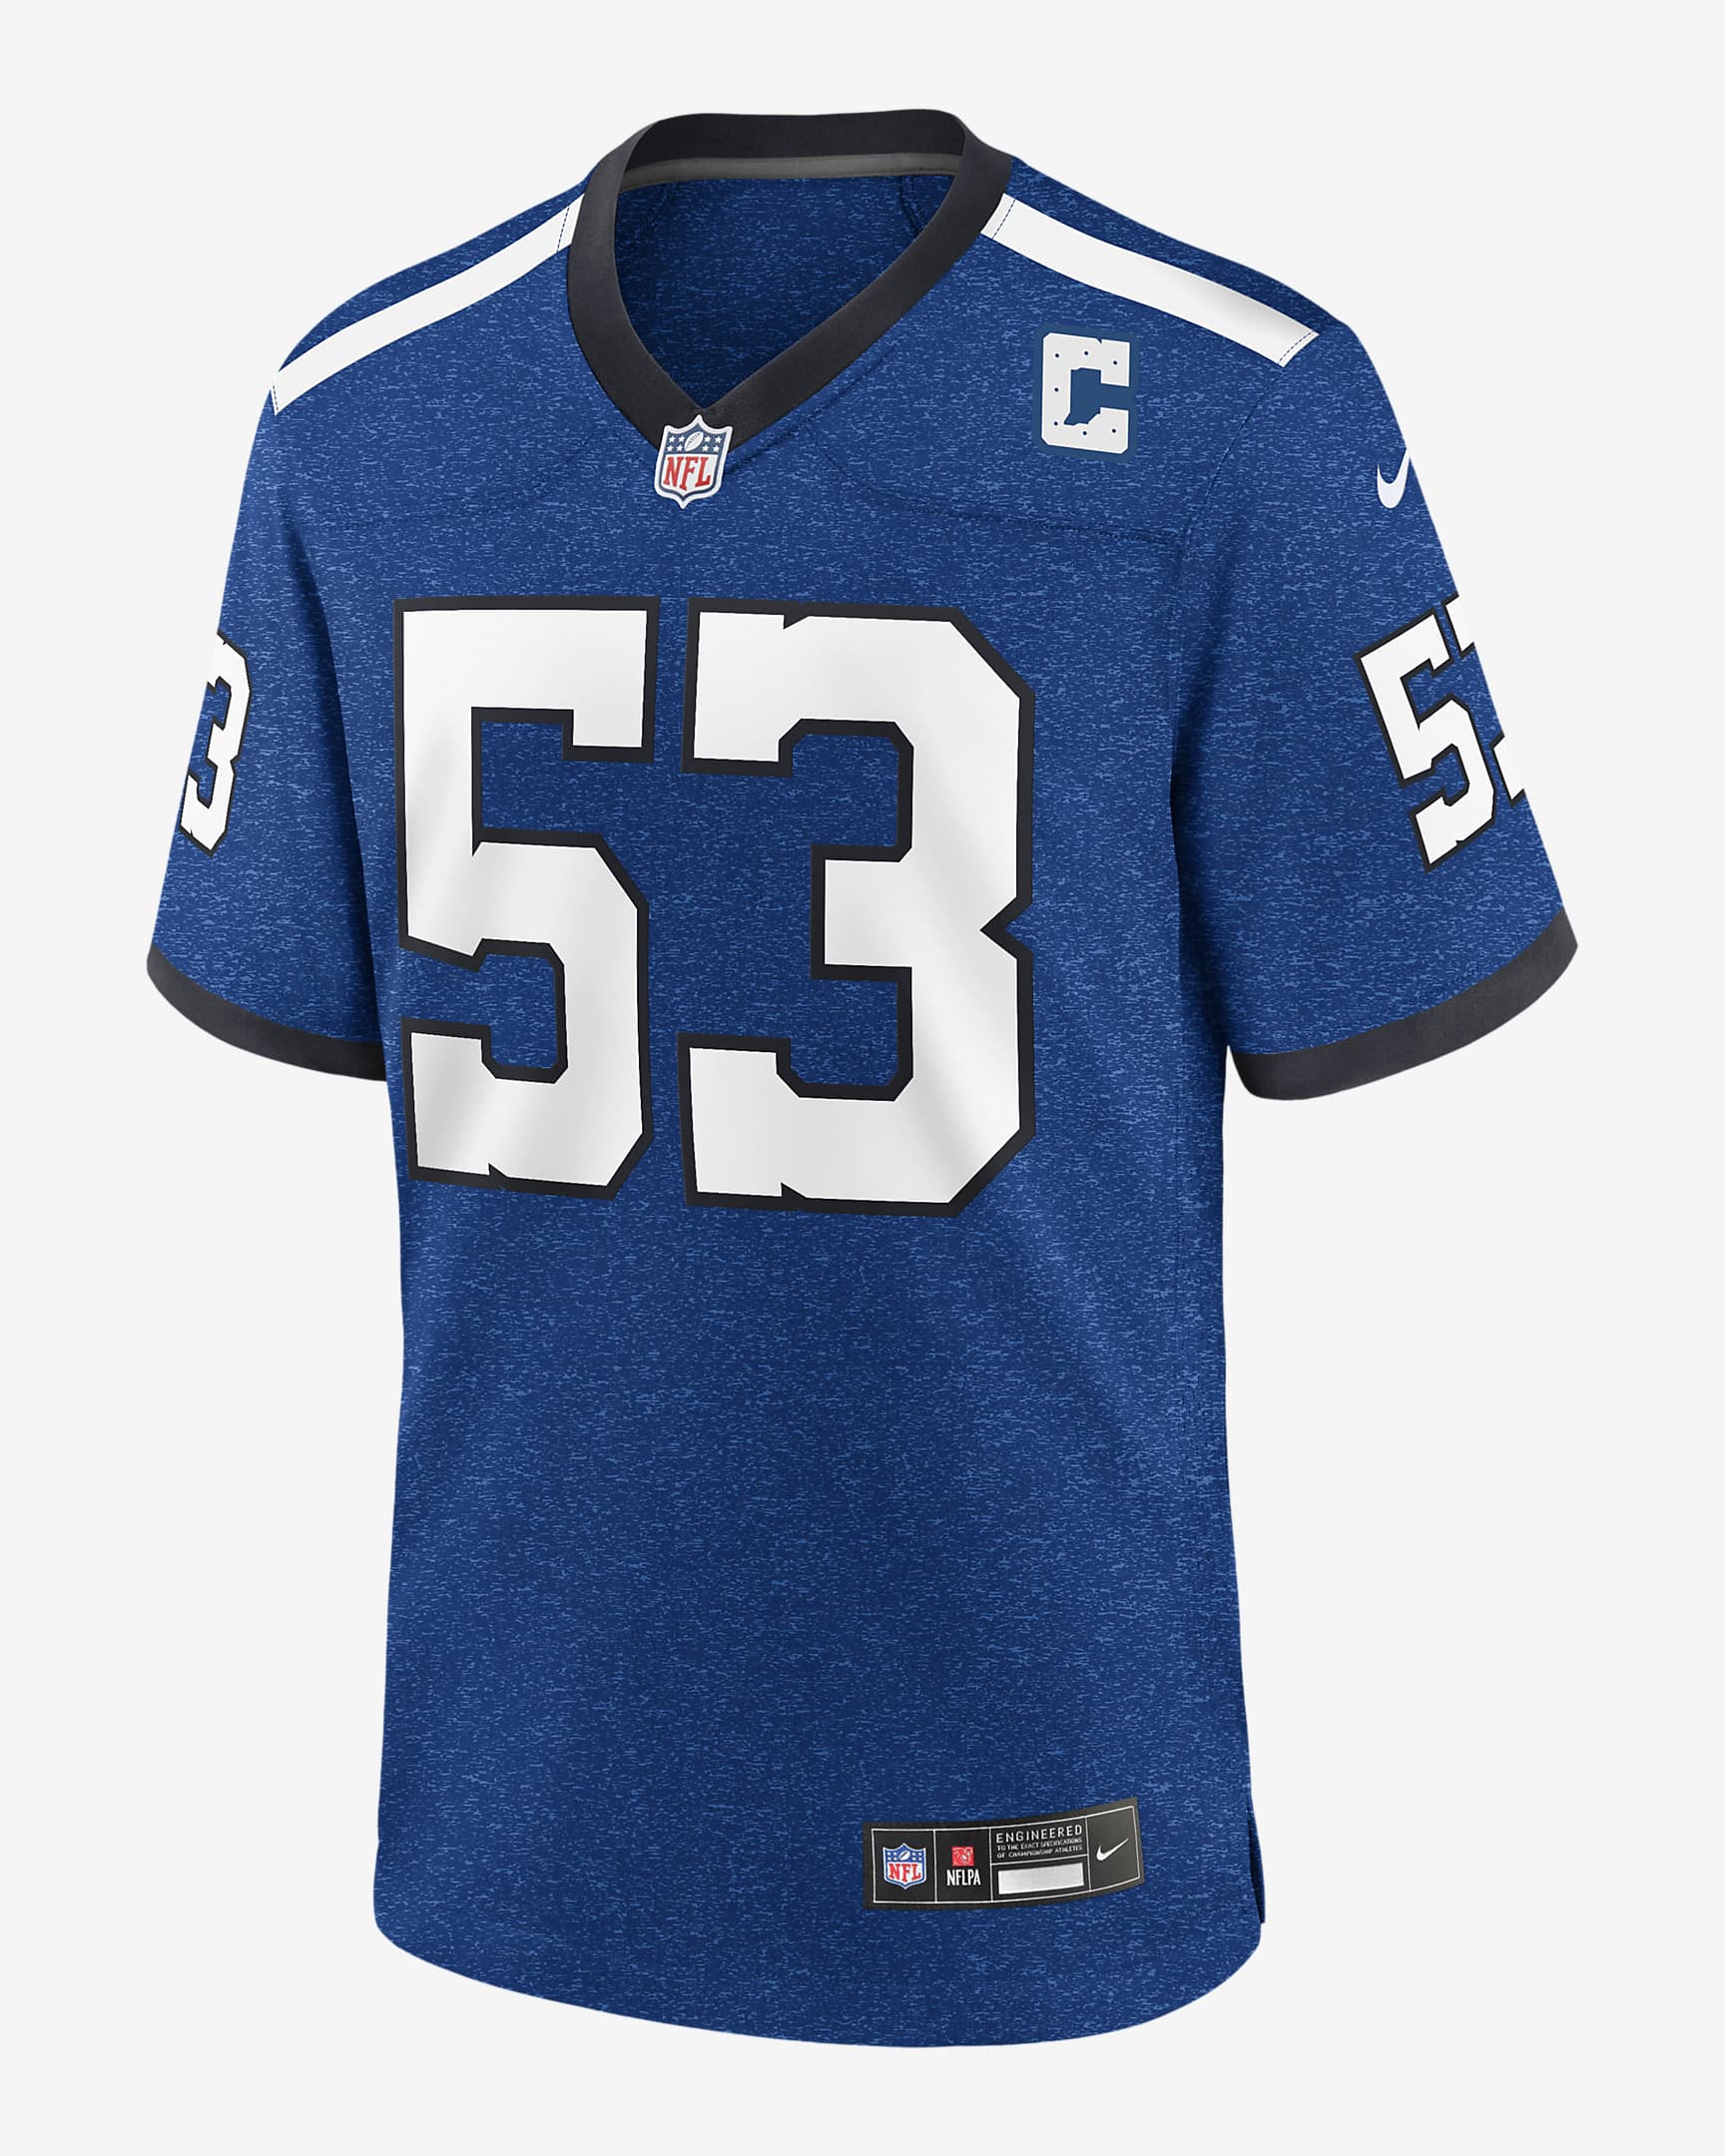 Shaquille Leonard Indianapolis Colts Men's Nike NFL Game Football ...